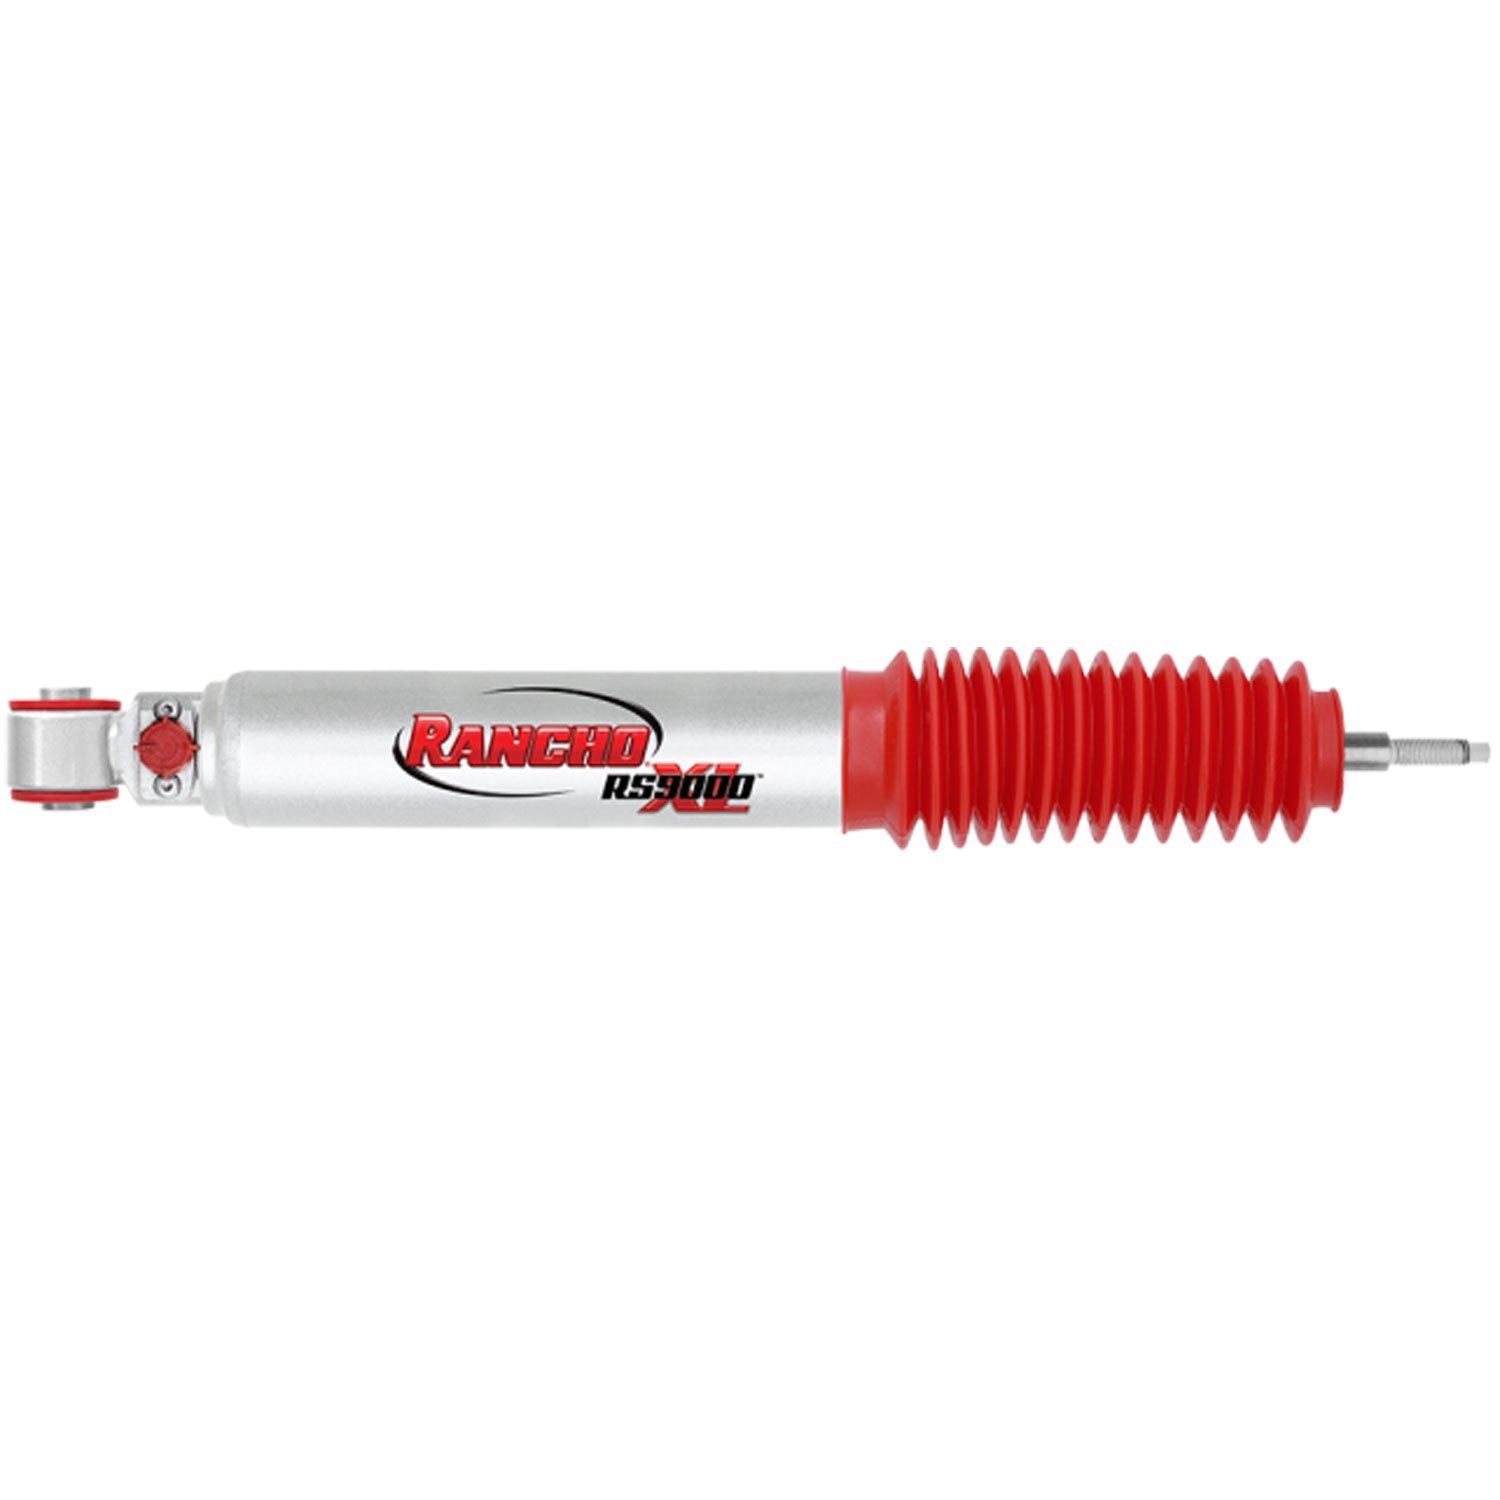 RS9000XL Rear Shock Absorber Fits Toyota 4Runner and FJ Cruiser